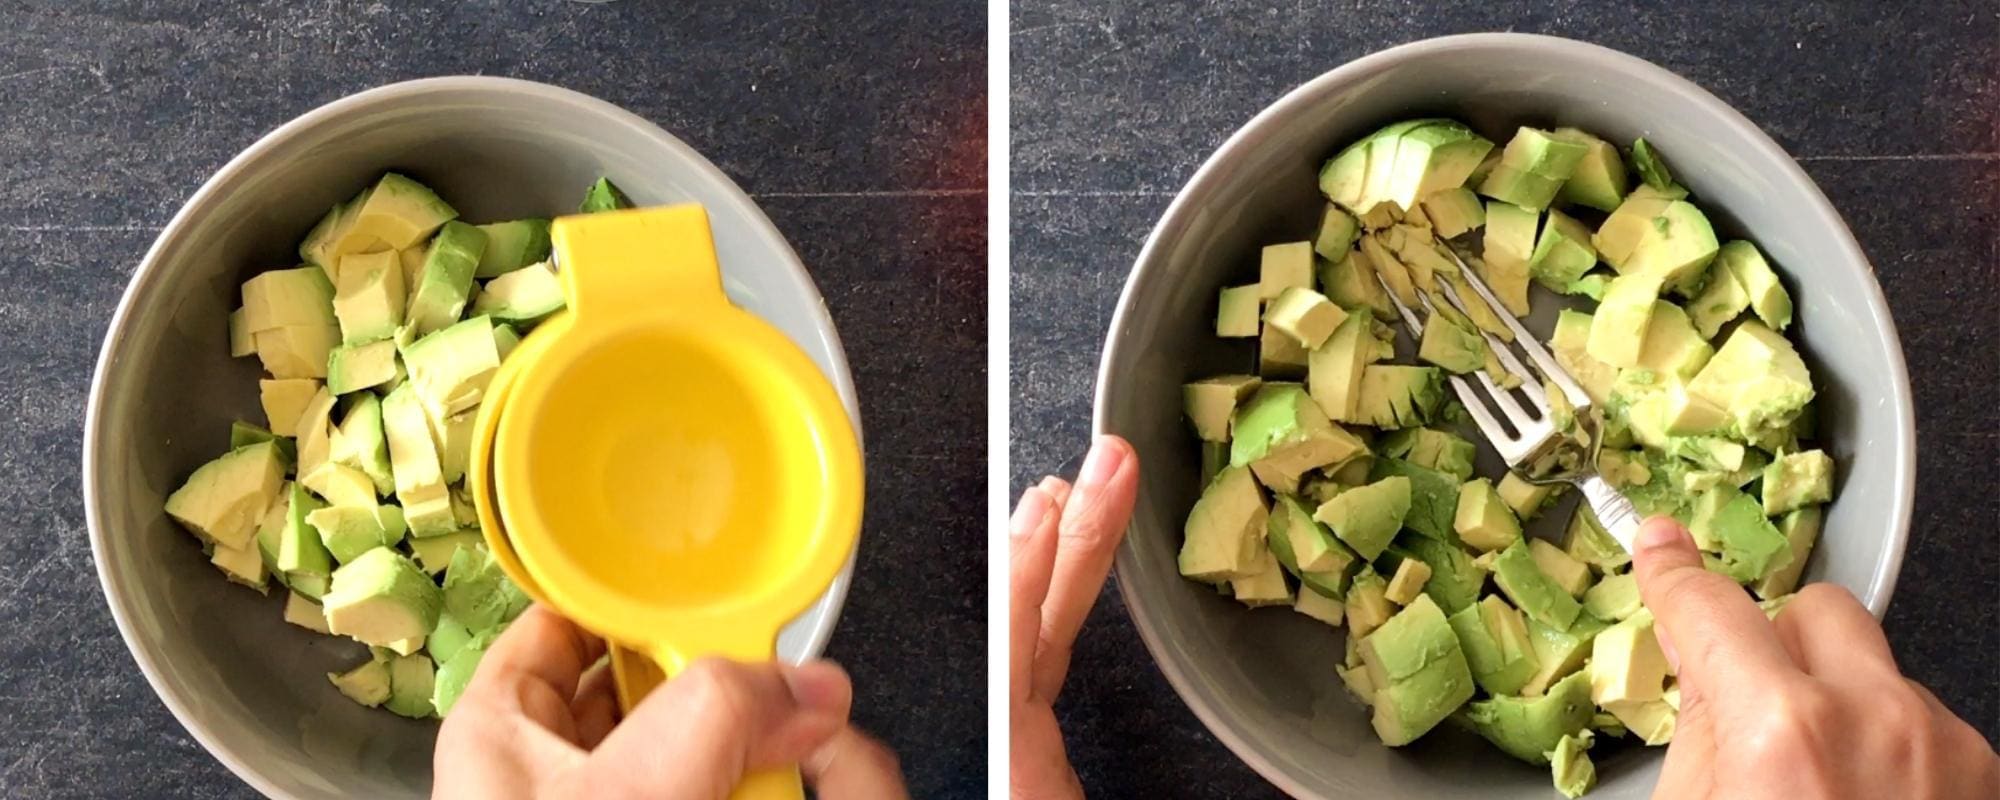 Step by step instructions on how to make Guacamole